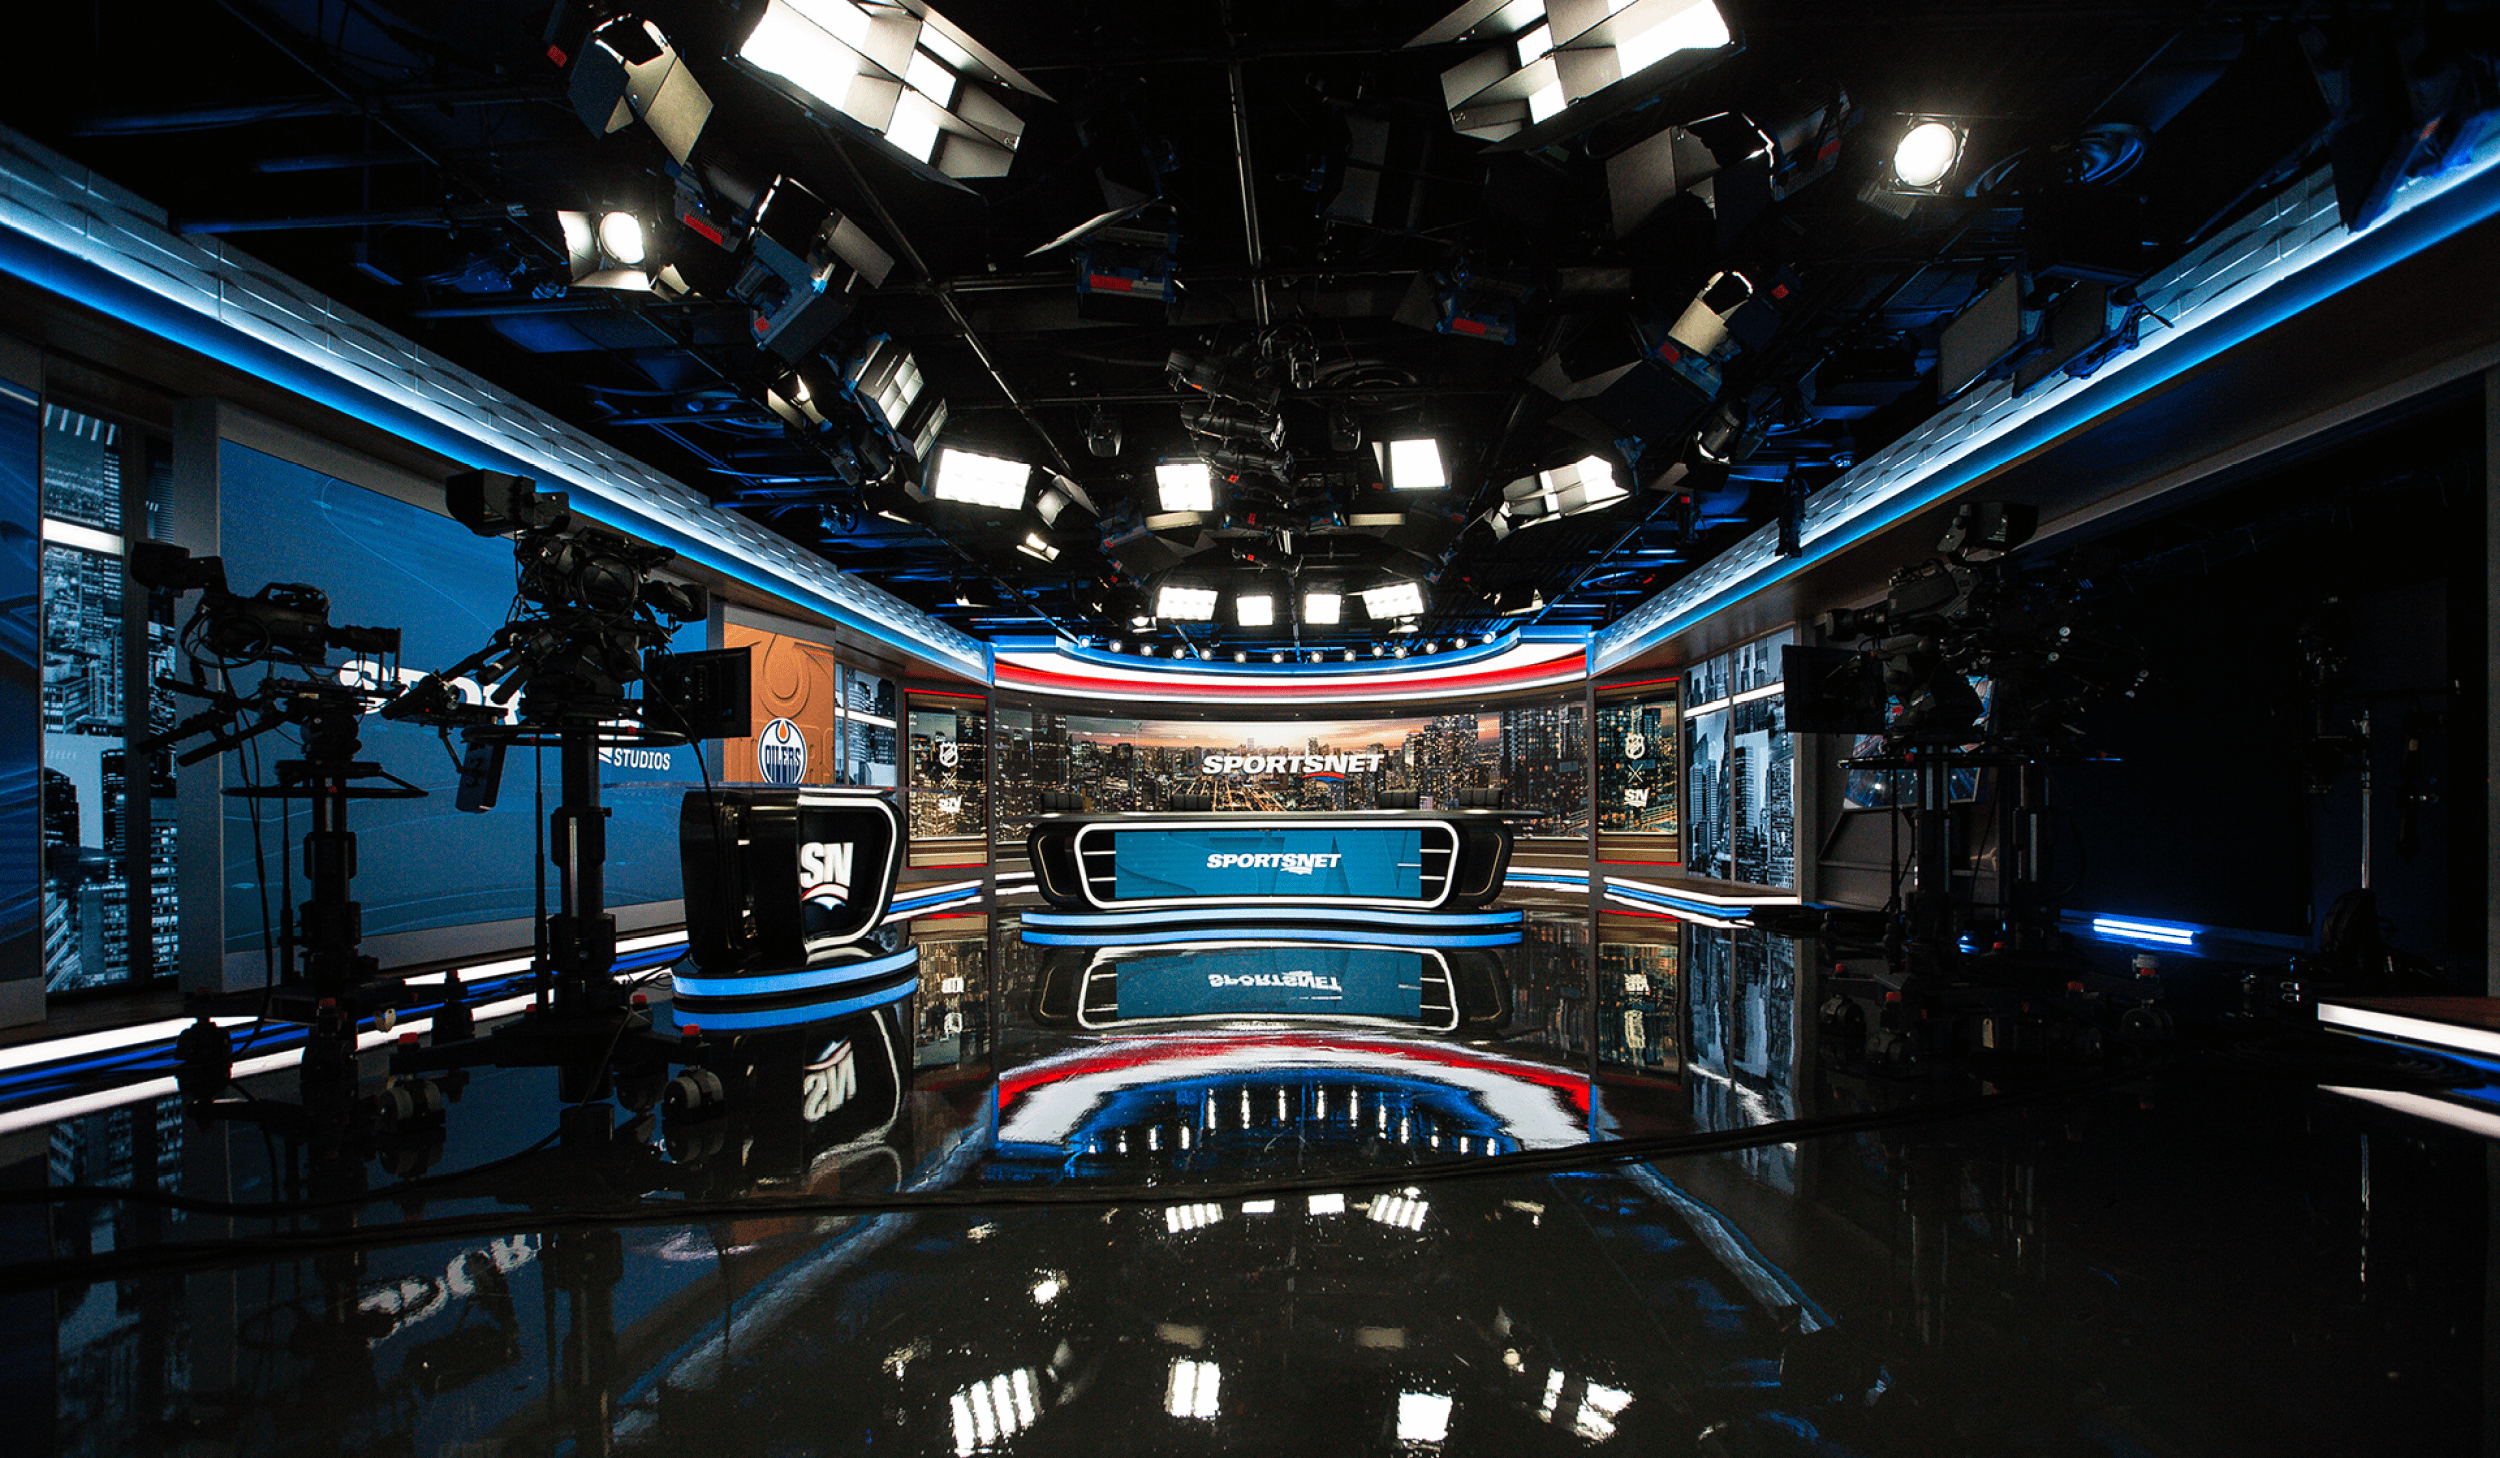 Sportsnet tv broadcast production studio showing the studio set with desks, screens and professional lighting